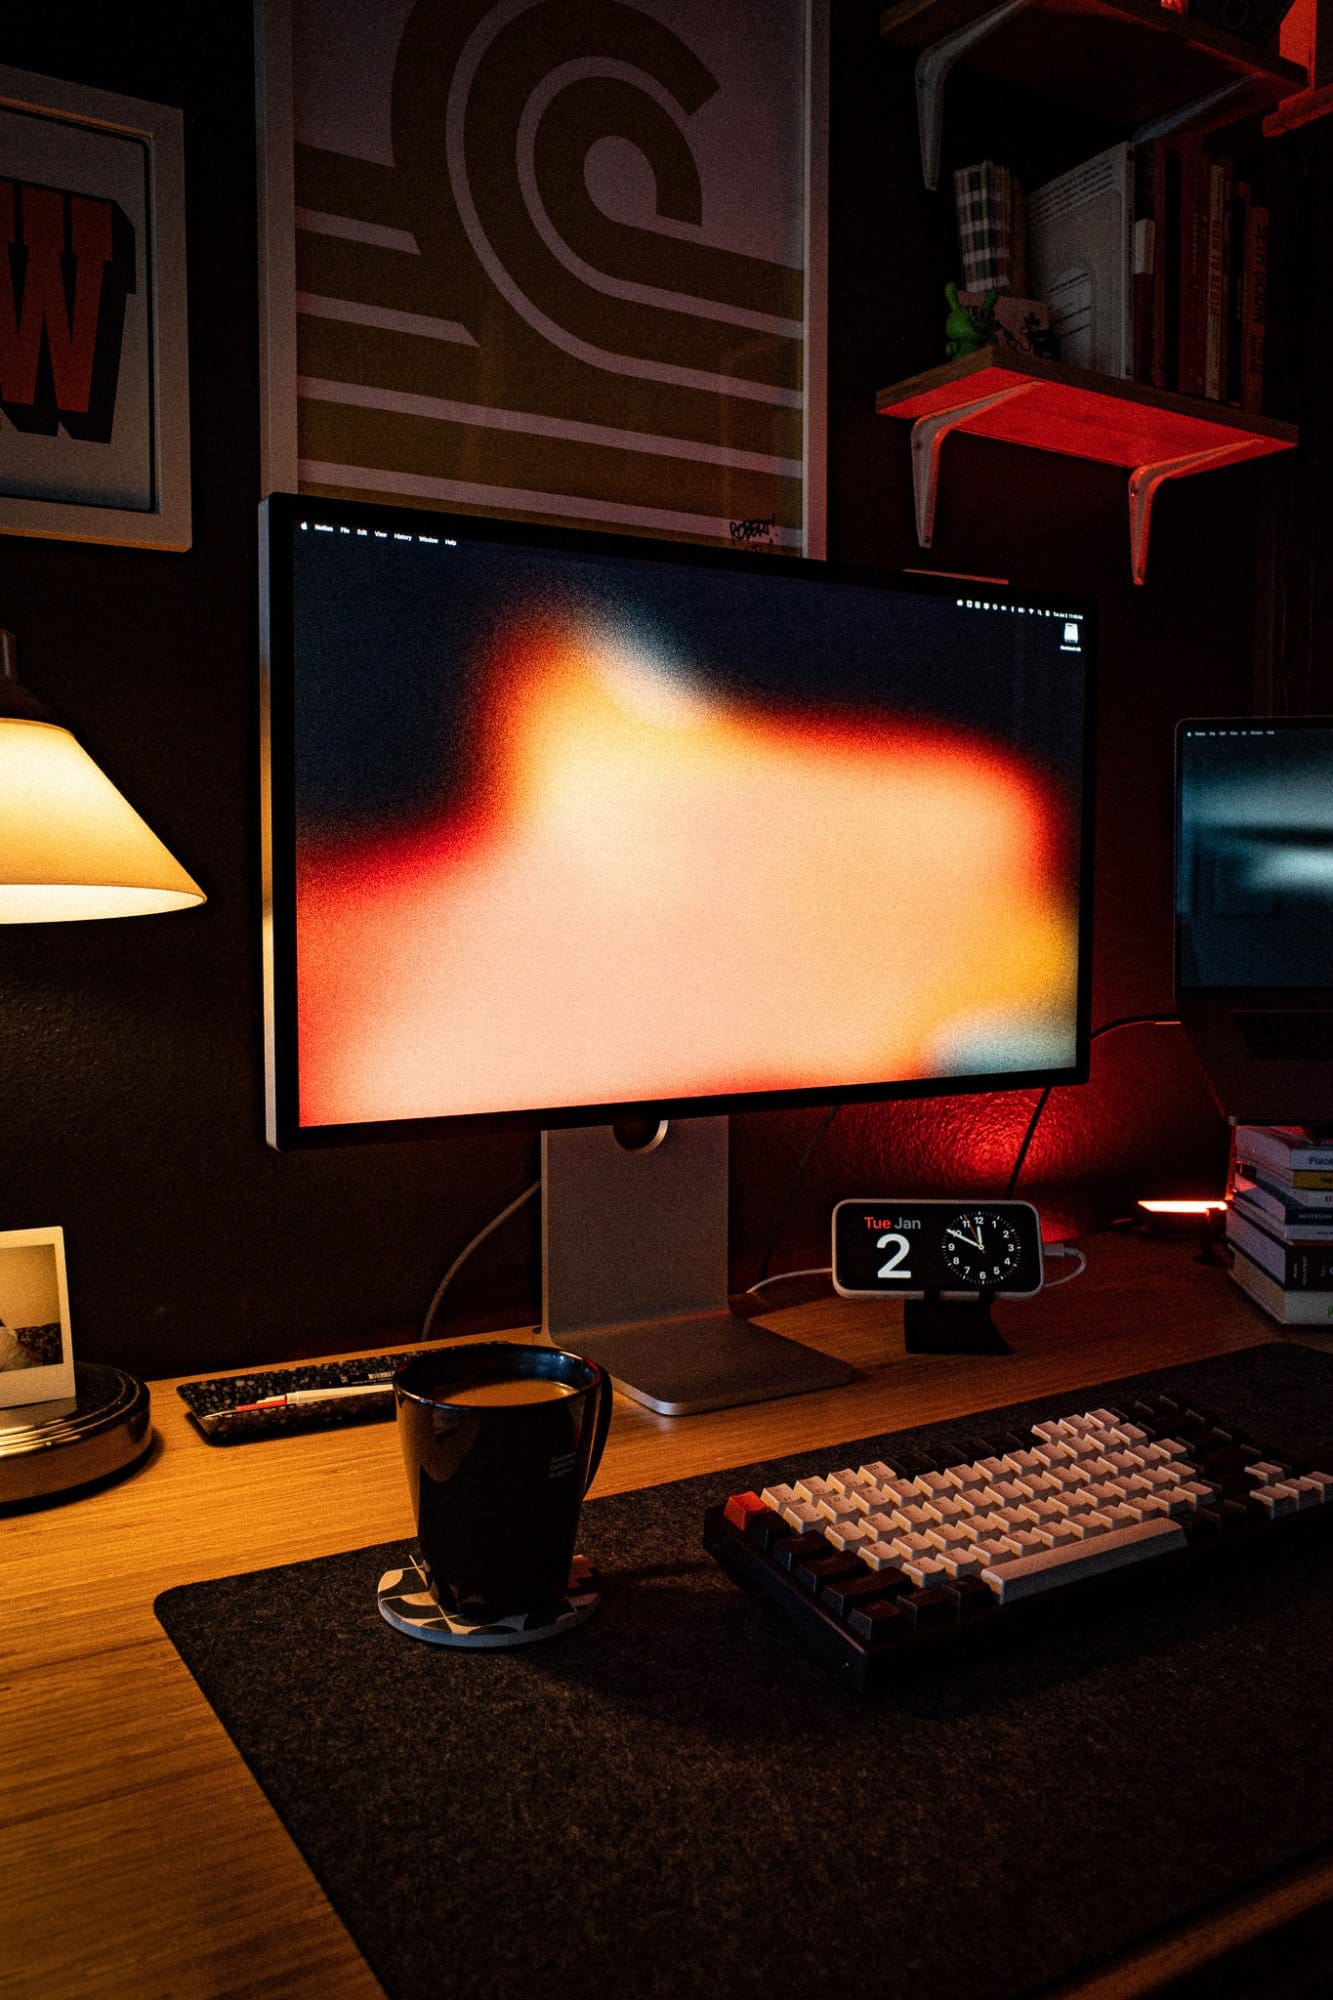 A neat desk with a computer monitor, a cup, and a keyboard under a table lamp, with art and shelves on the wall